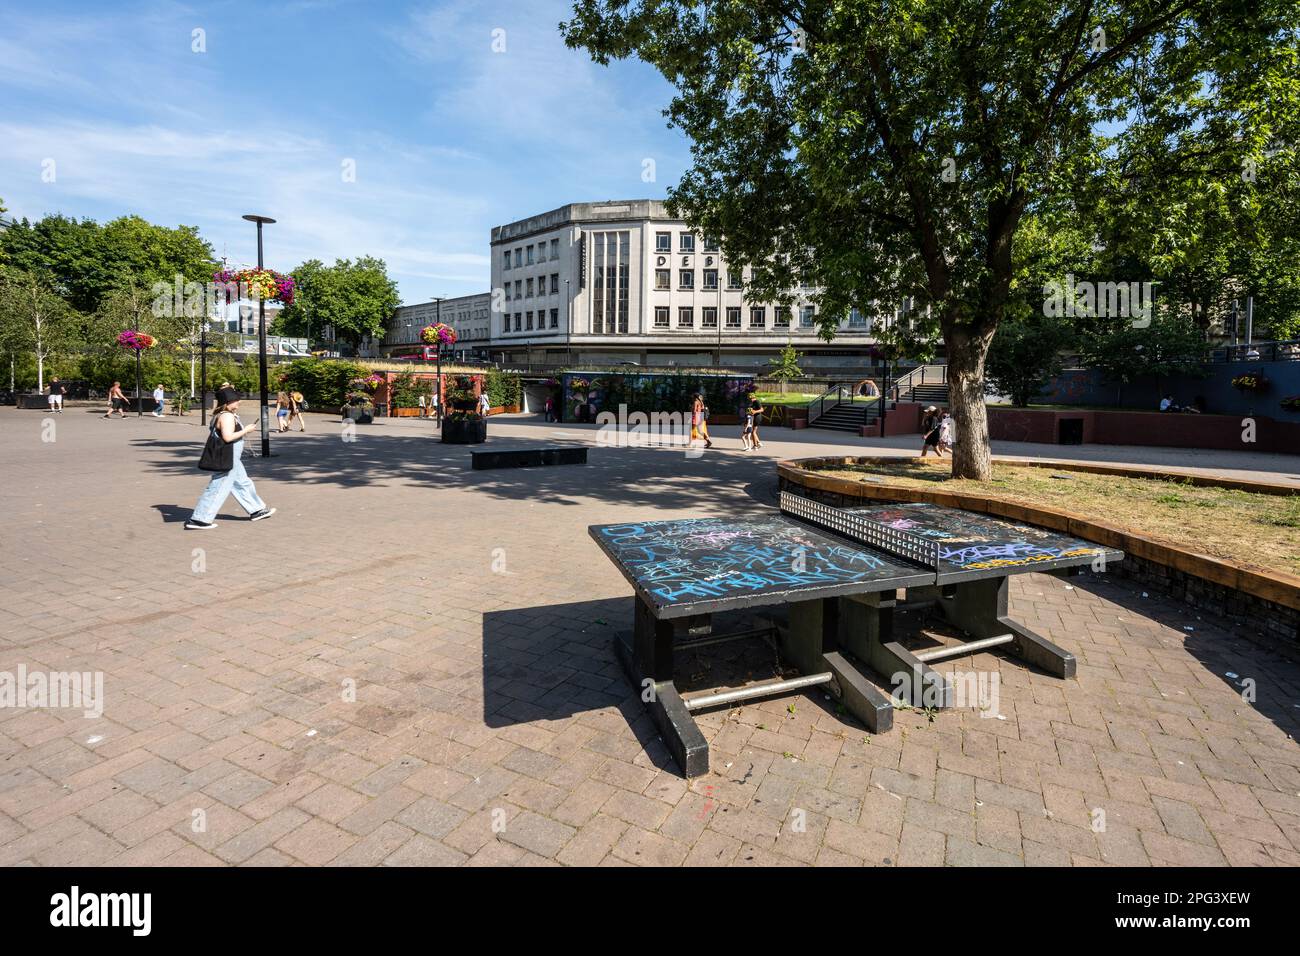 Pedestrians walk past a ping pong table in 'The Bearpit', a sunken plaza within St James Barton Roundabout in Bristol. Stock Photo